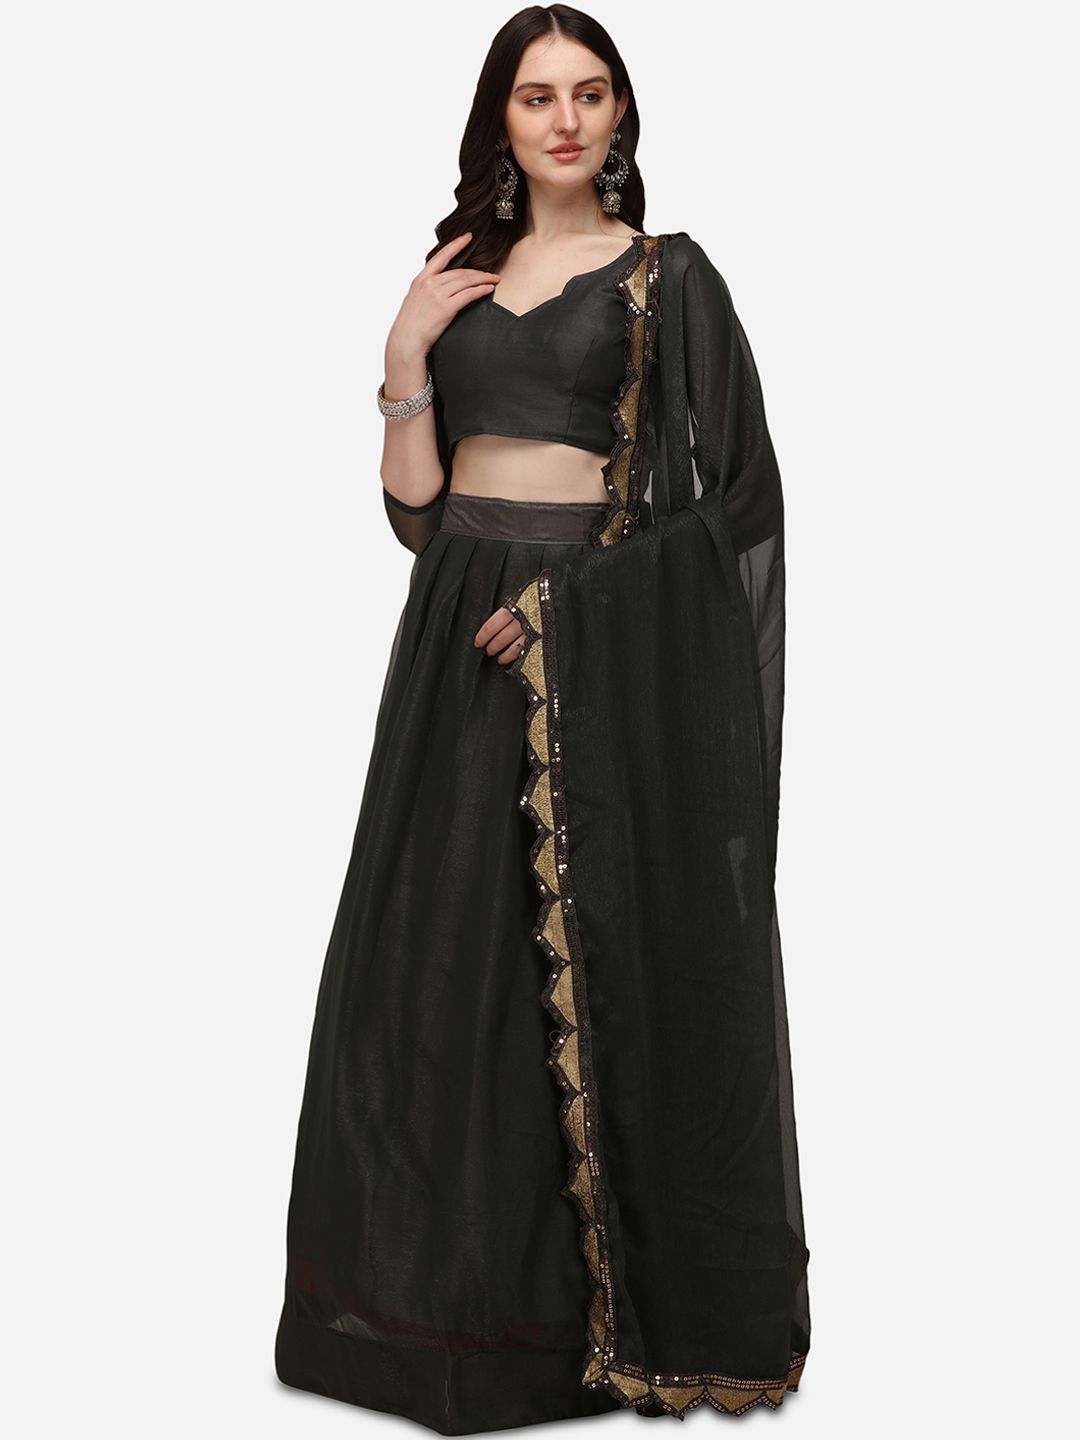 Pratham Blue Black Sequinned Semi-Stitched Lehenga & Unstitched Blouse With Dupatta Price in India